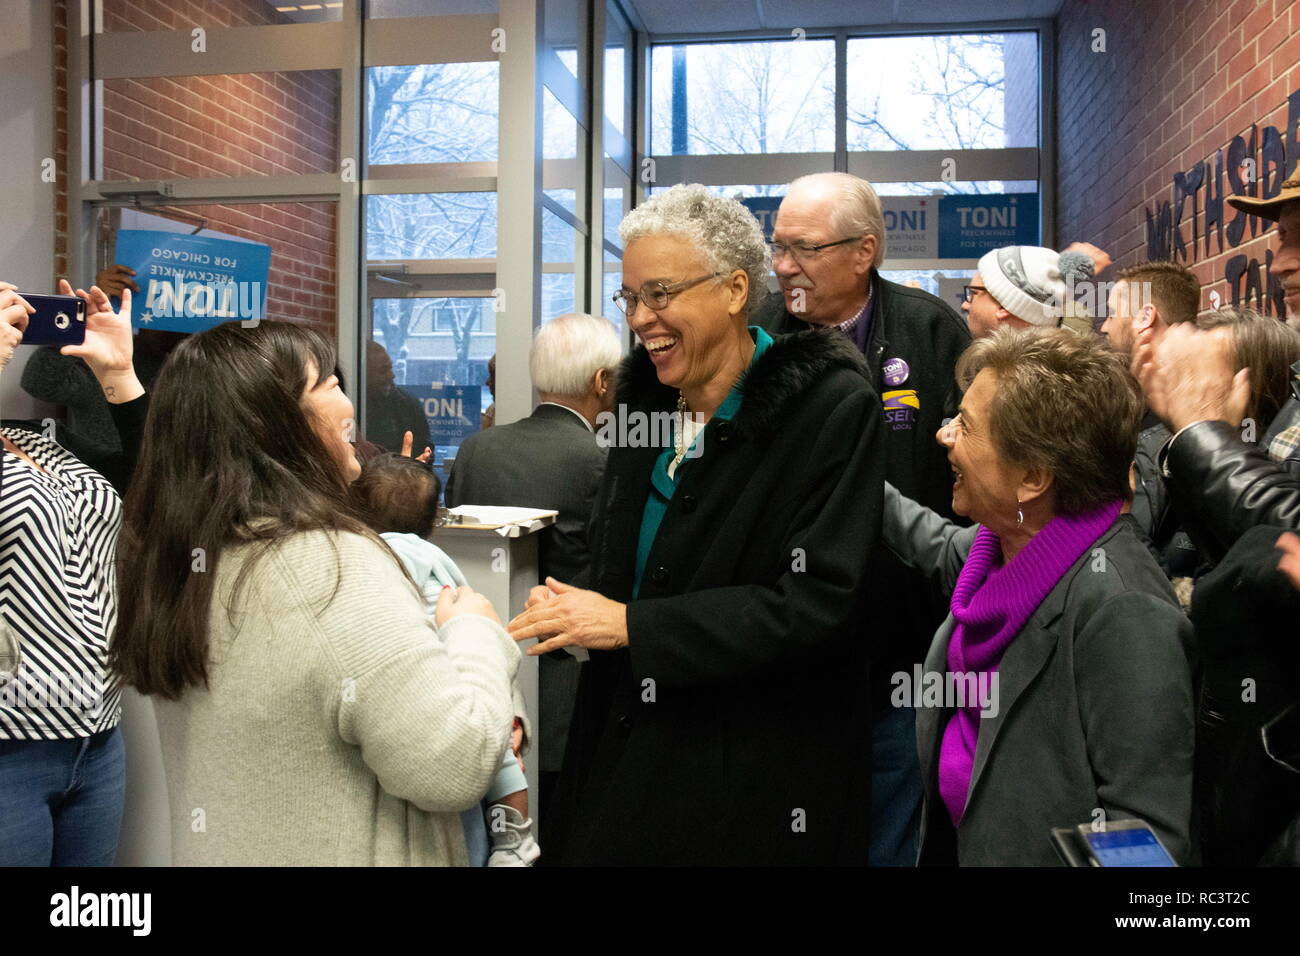 Chicago, Illinios, USA. 12th Jan, 2019. Opening of North side office of Toni Preckwinkle running for mayor of Chicago. Toni Preckwinkle greets her supporters. Credit: Karen I. Hirsch/ZUMA Wire/Alamy Live News Stock Photo